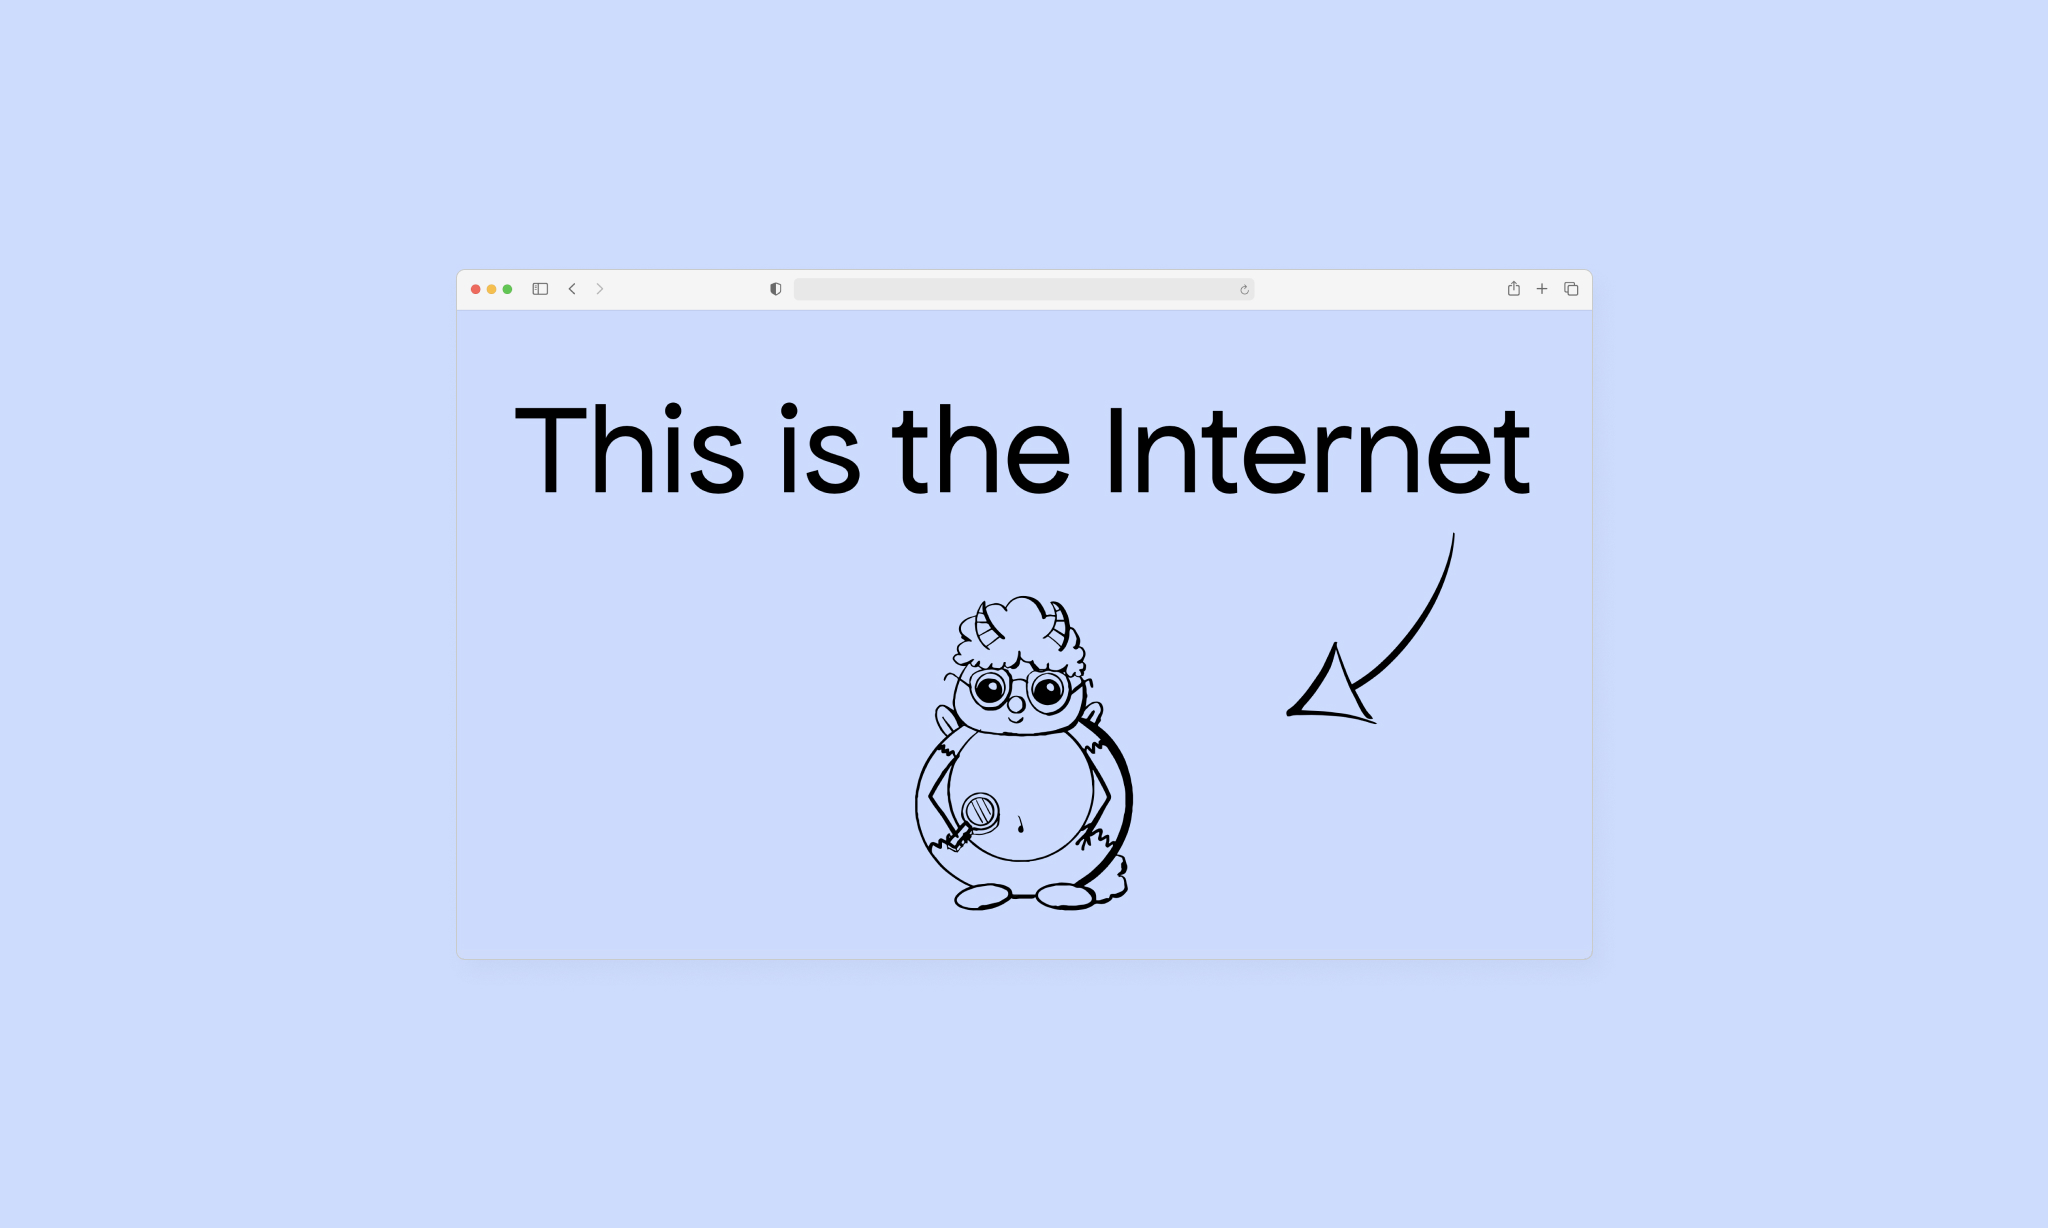 A website about the Internet